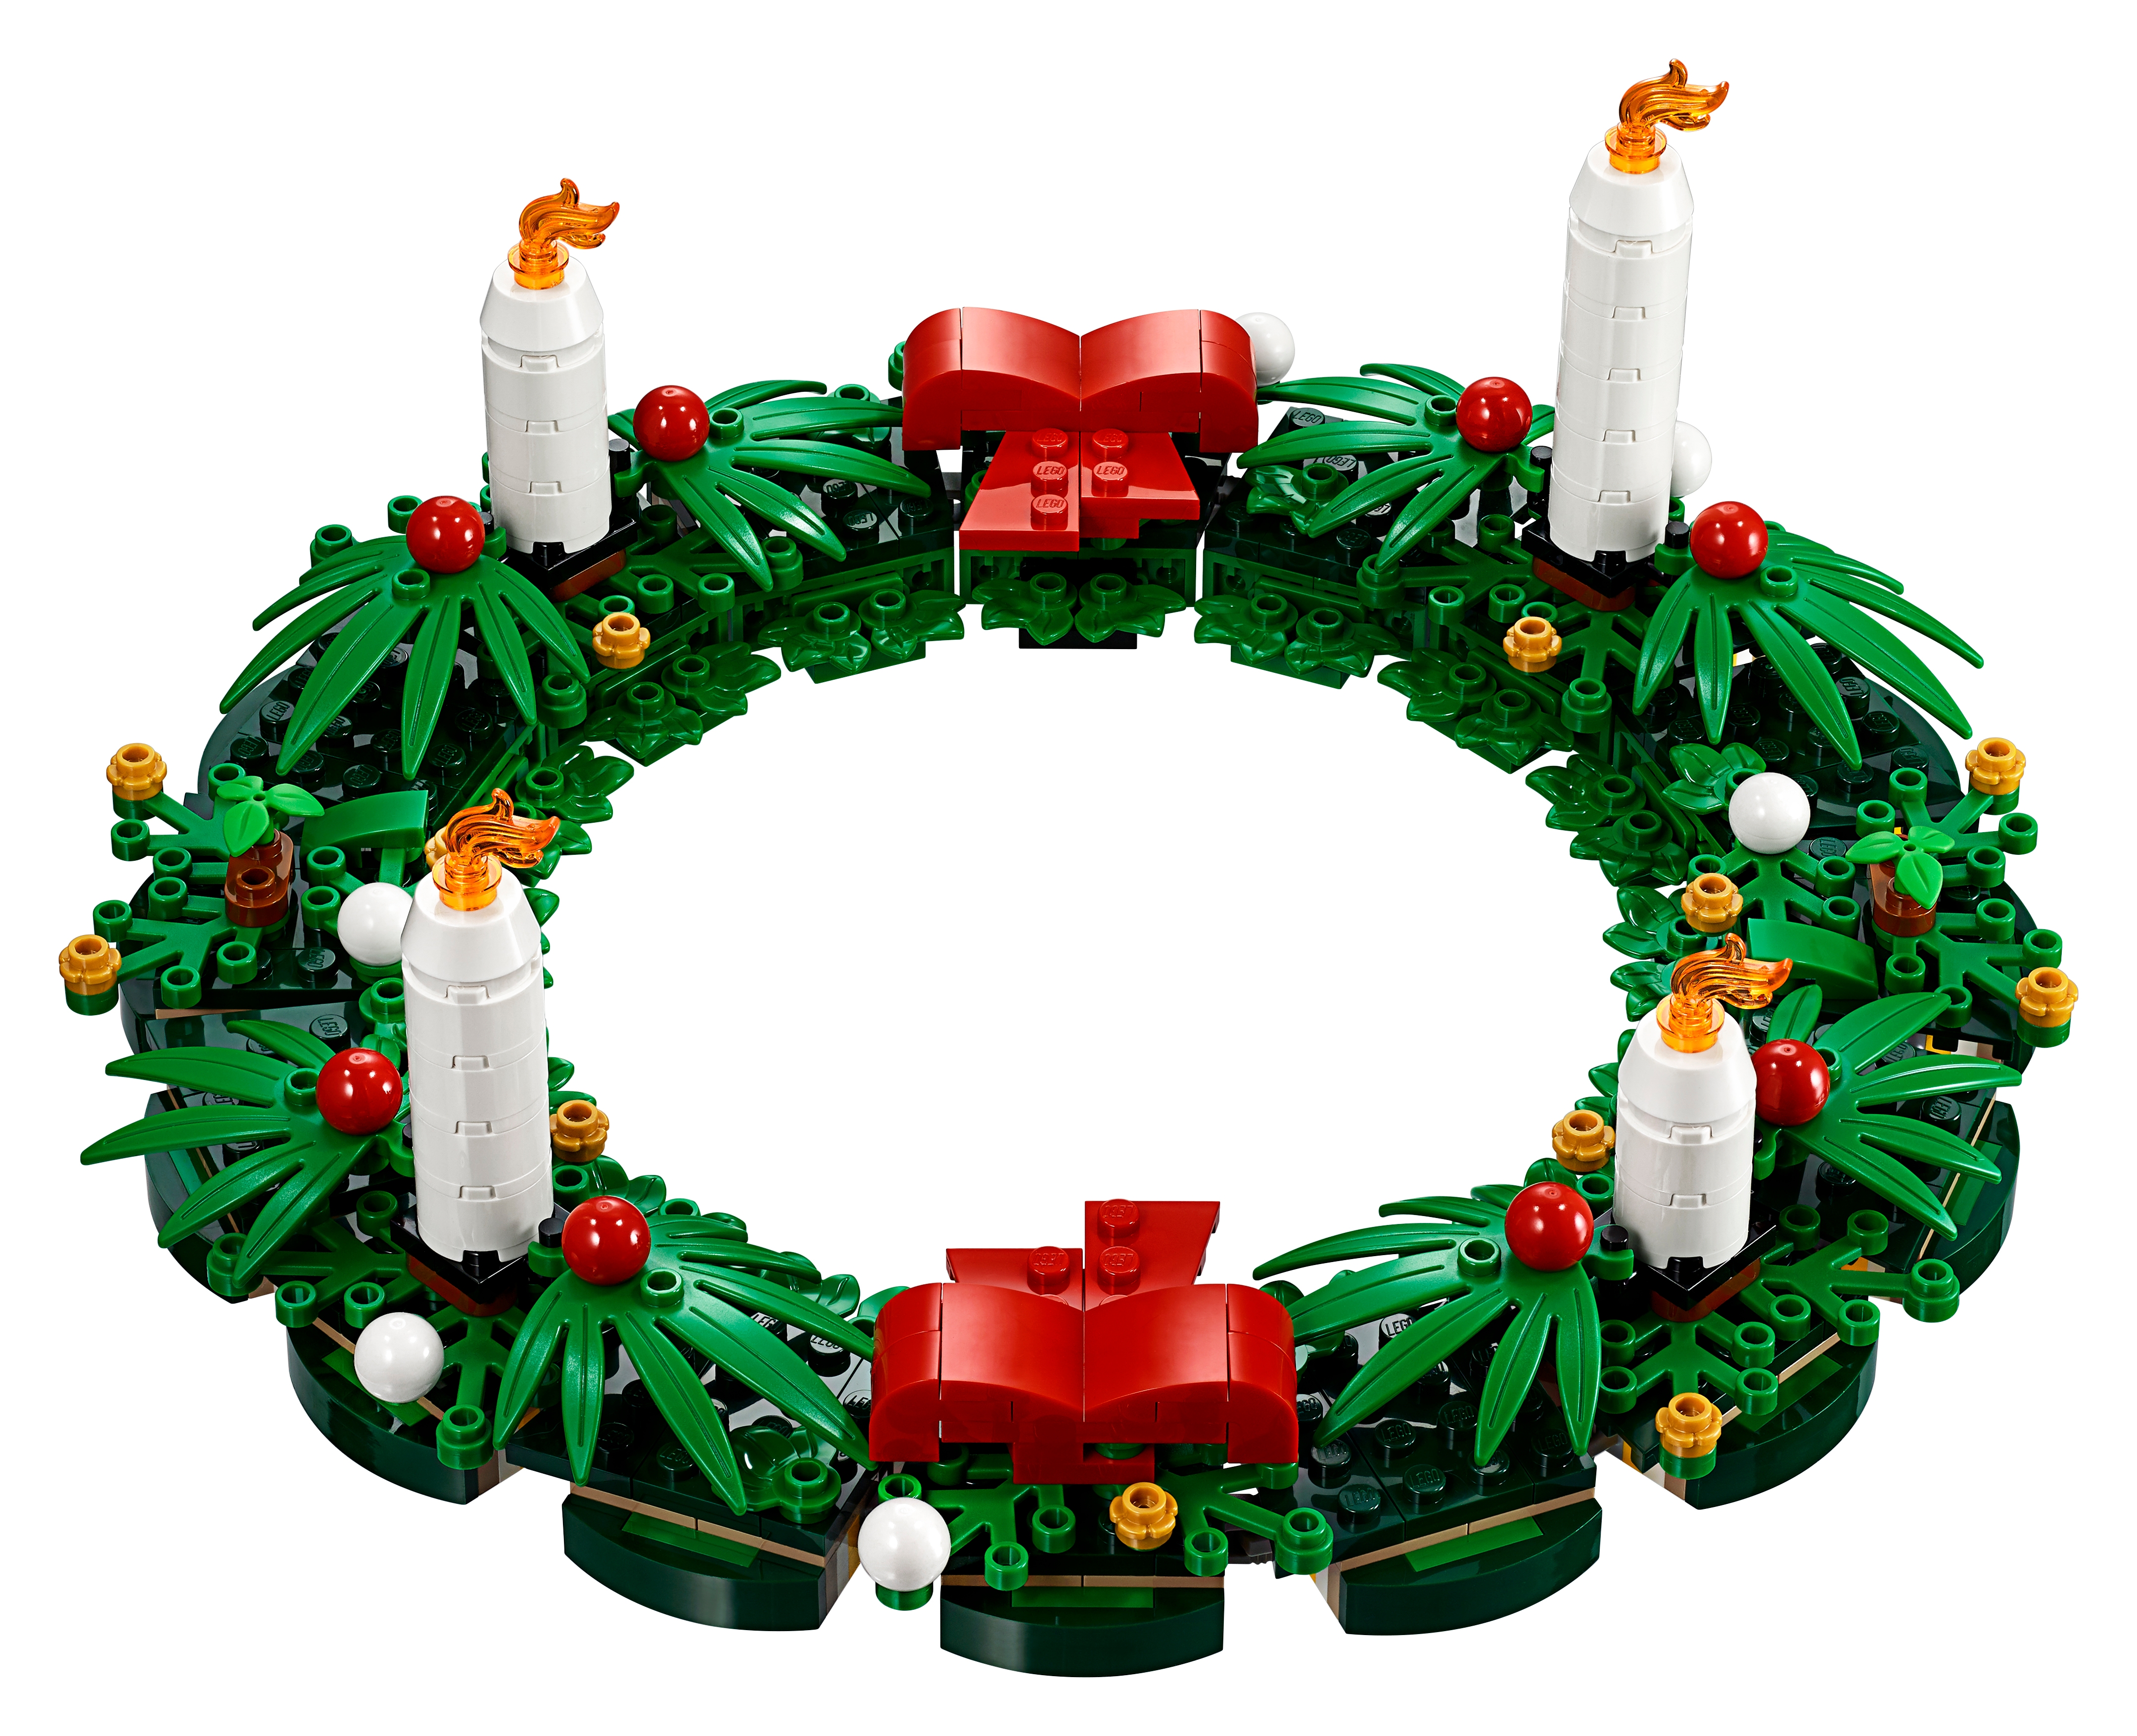 Lego Holiday Combo Pack - Christmas Tree with Presents, Holiday Wreath, 2 Candy Canes, and Santa Claus Minifigure with North Pole Stand